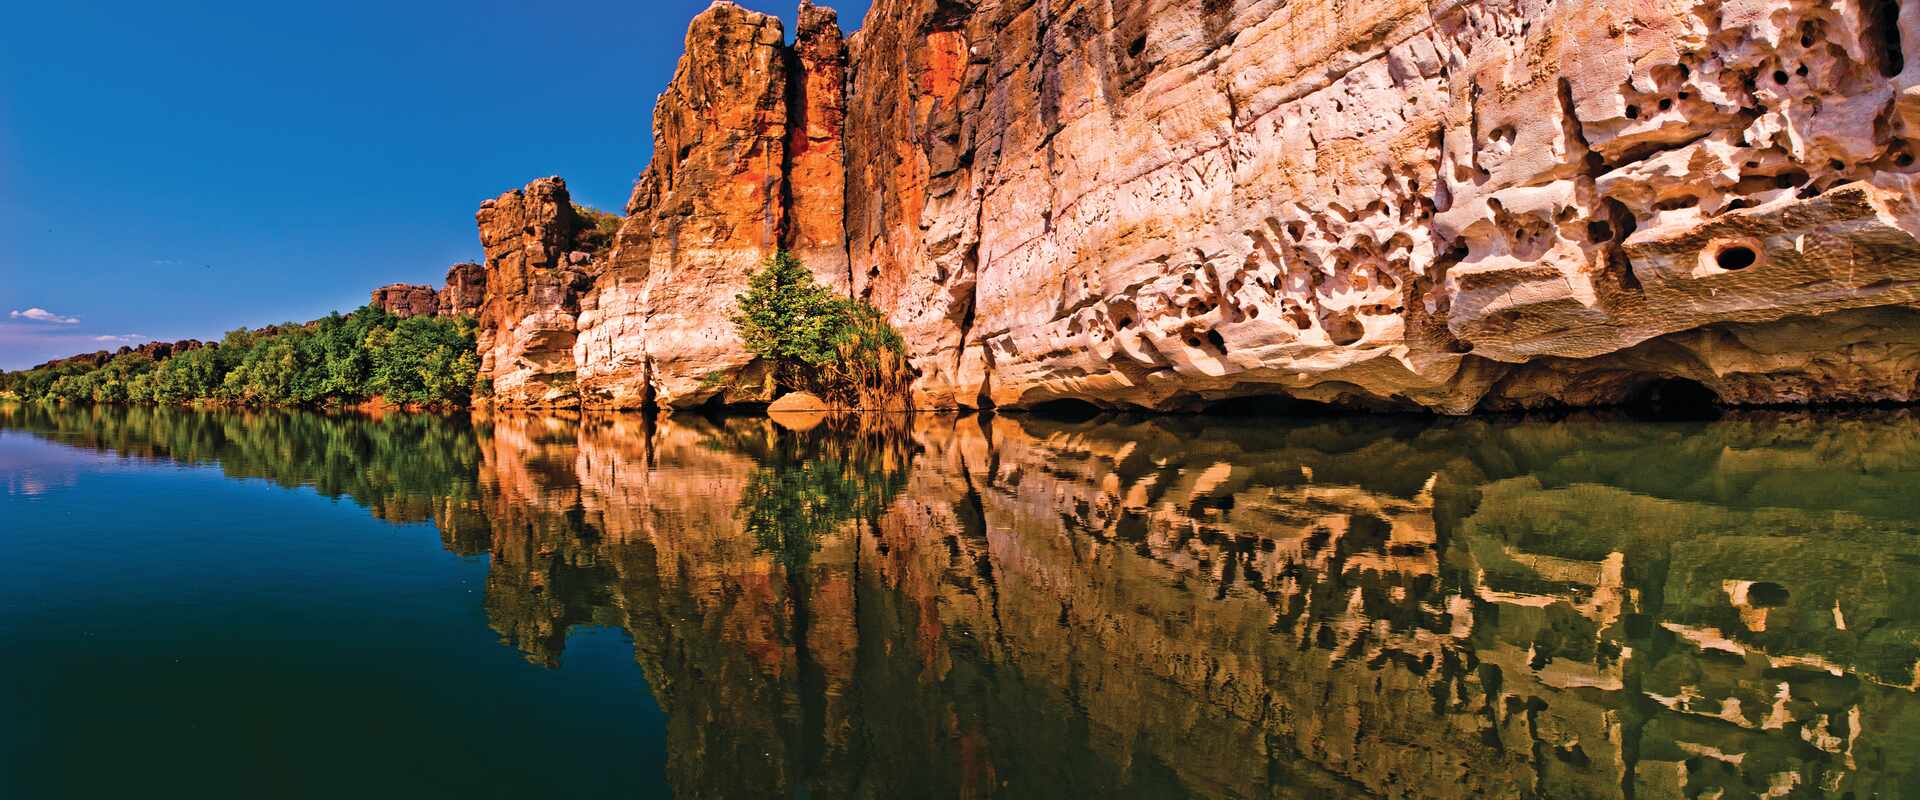 Red cliff face with reflection in the water, Australia